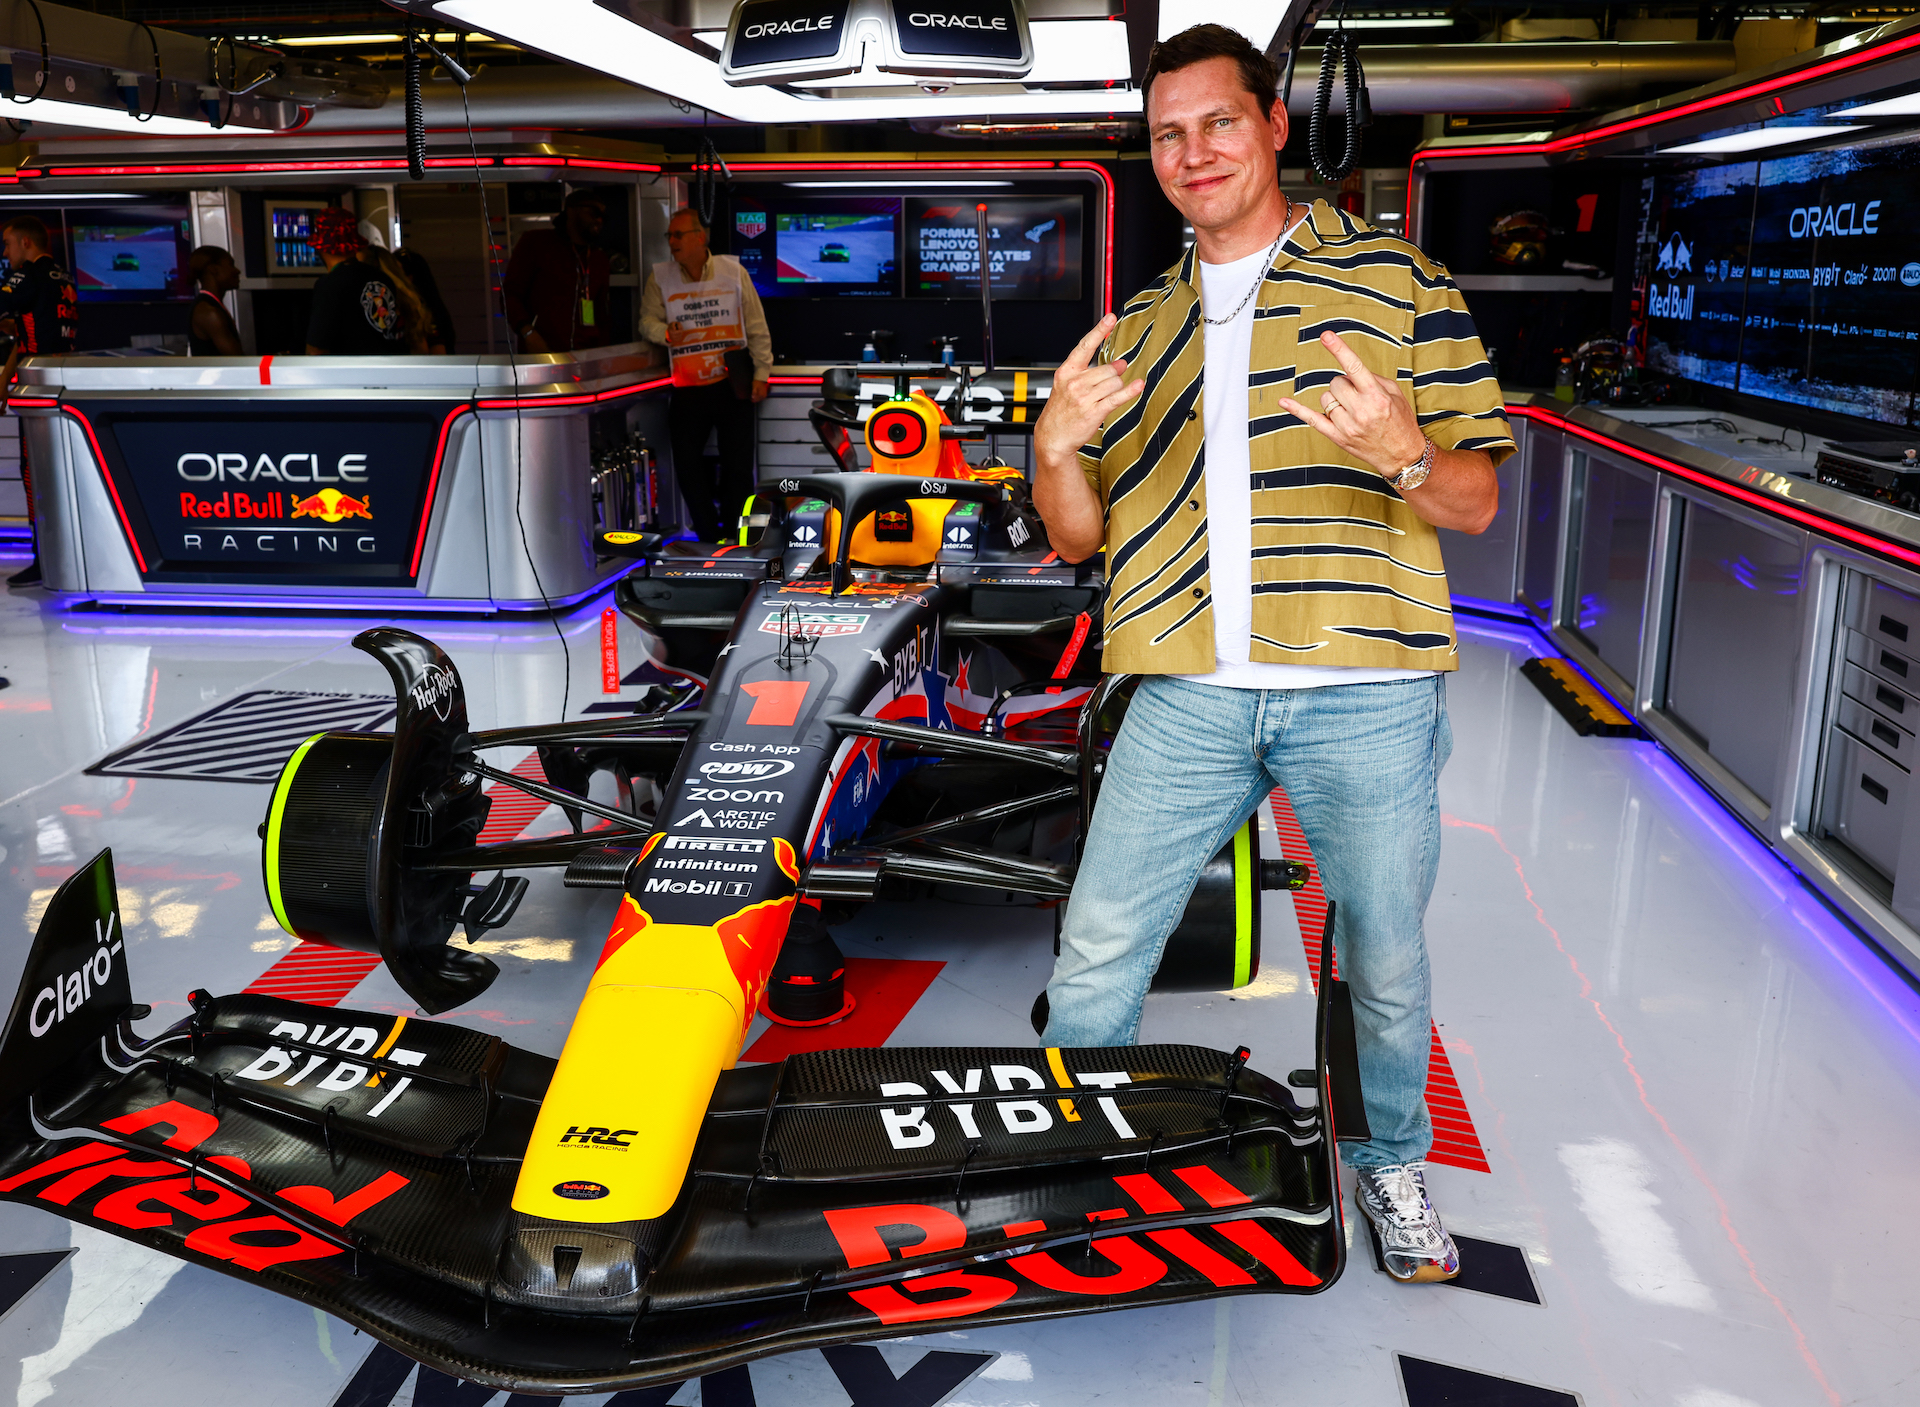 Dutch DJ Tiesto makes the "hook 'em horns" gesture with both hands as he stands in the Oracle race paddock at the Austin Grand Prix. He's standing over one of the race cars, quite close actually, in a way that only VIPs can get to a multi-million dollar precision race car. He is dressed casually in jeans and a tiger-striped short sleeve button down, open over a white t-shirt, and has a satisfied look on his face.